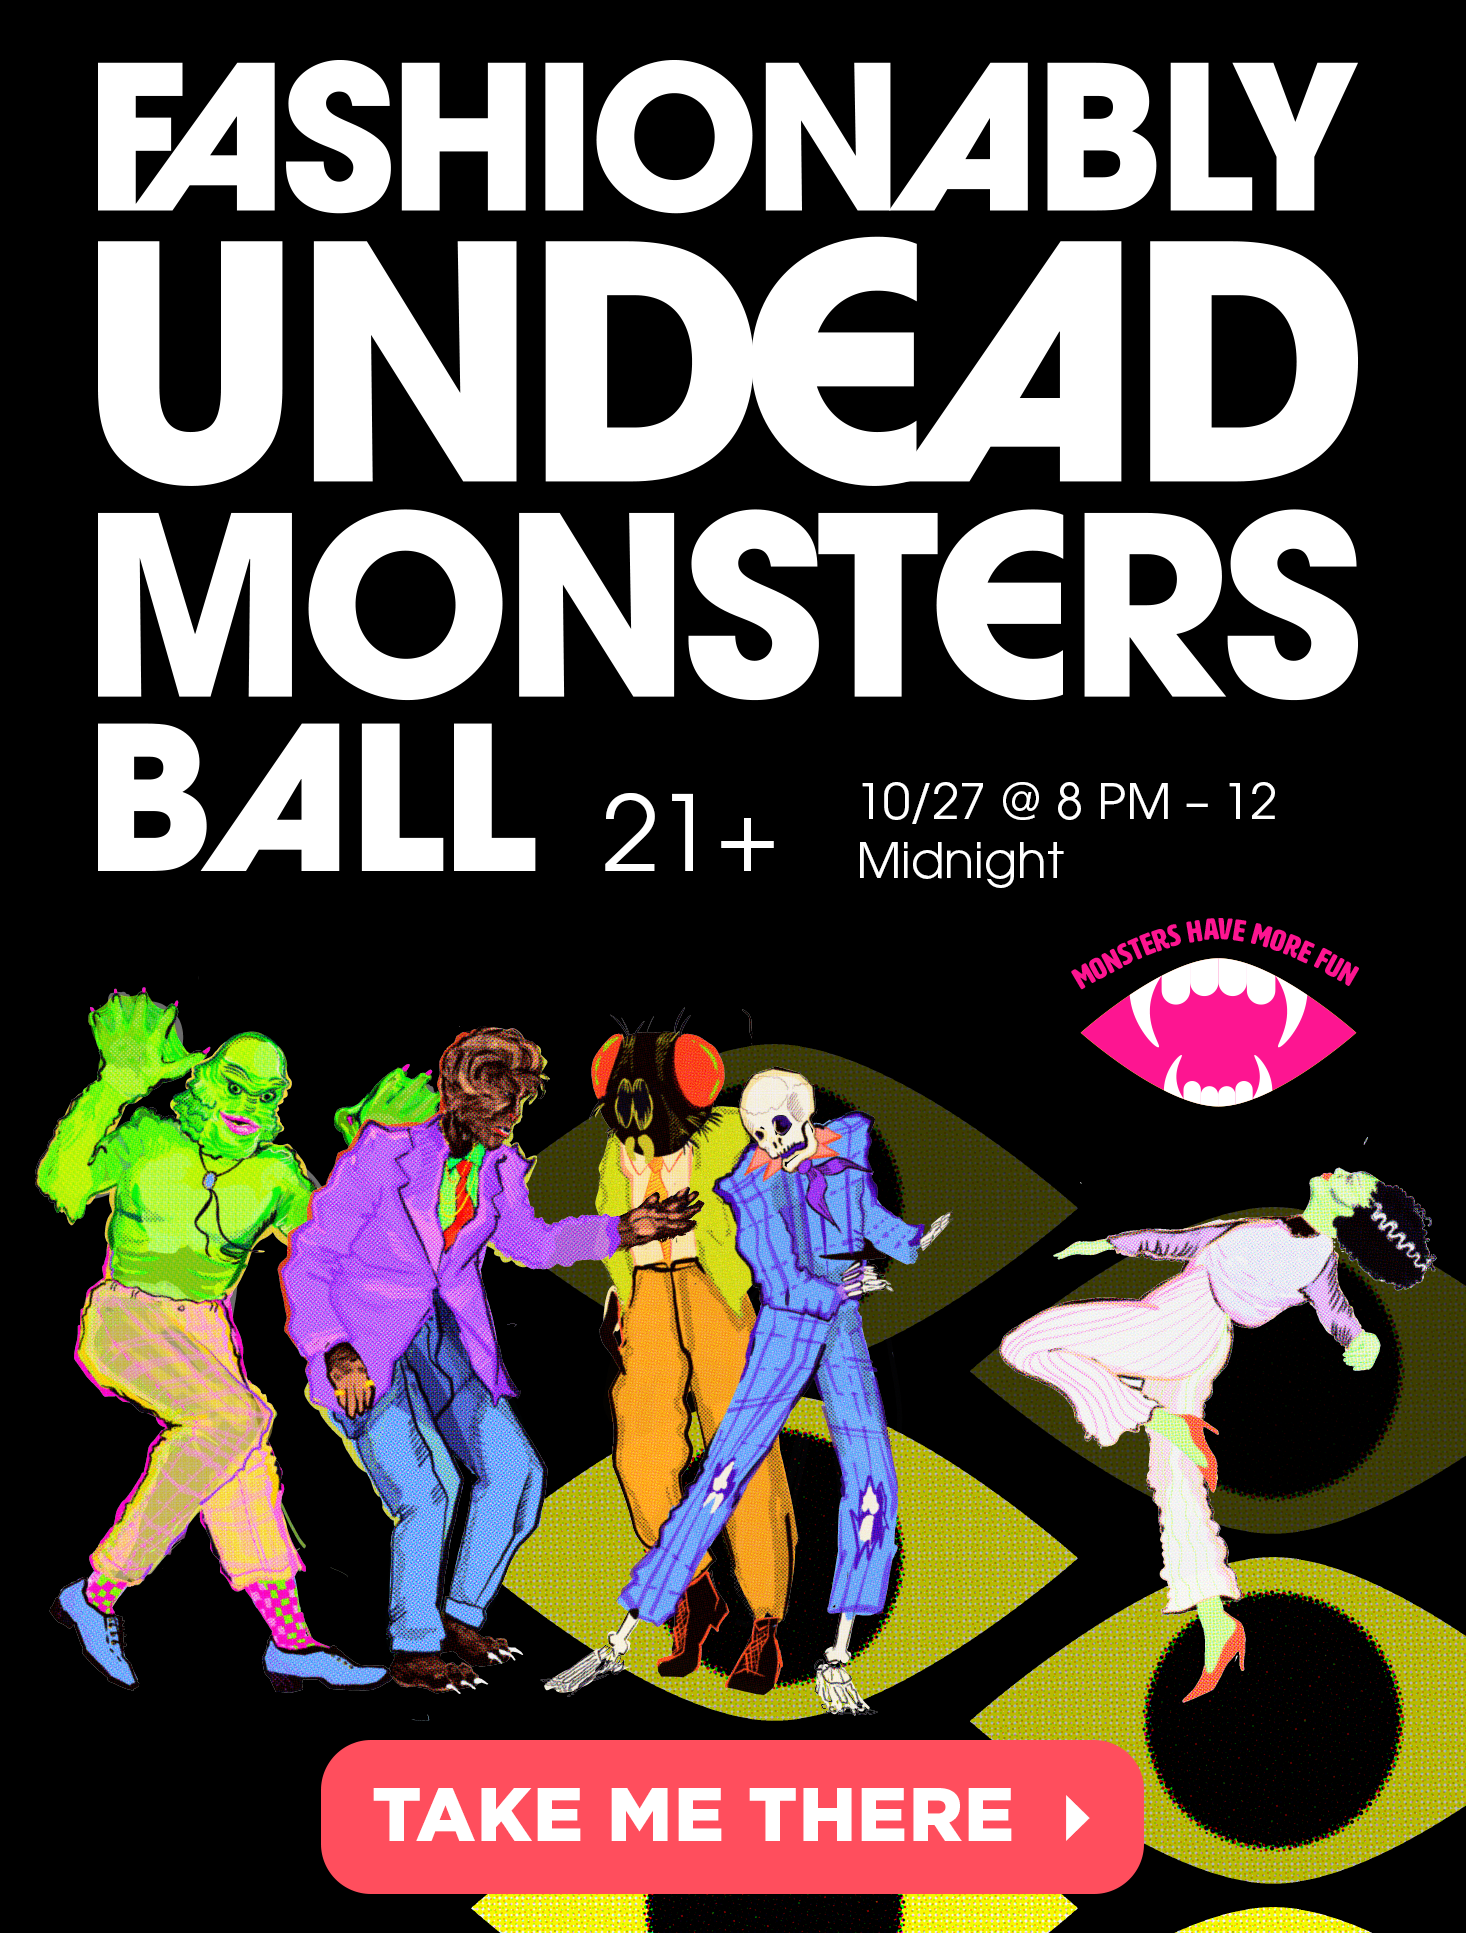 Fashionably Undead Monsters Ball